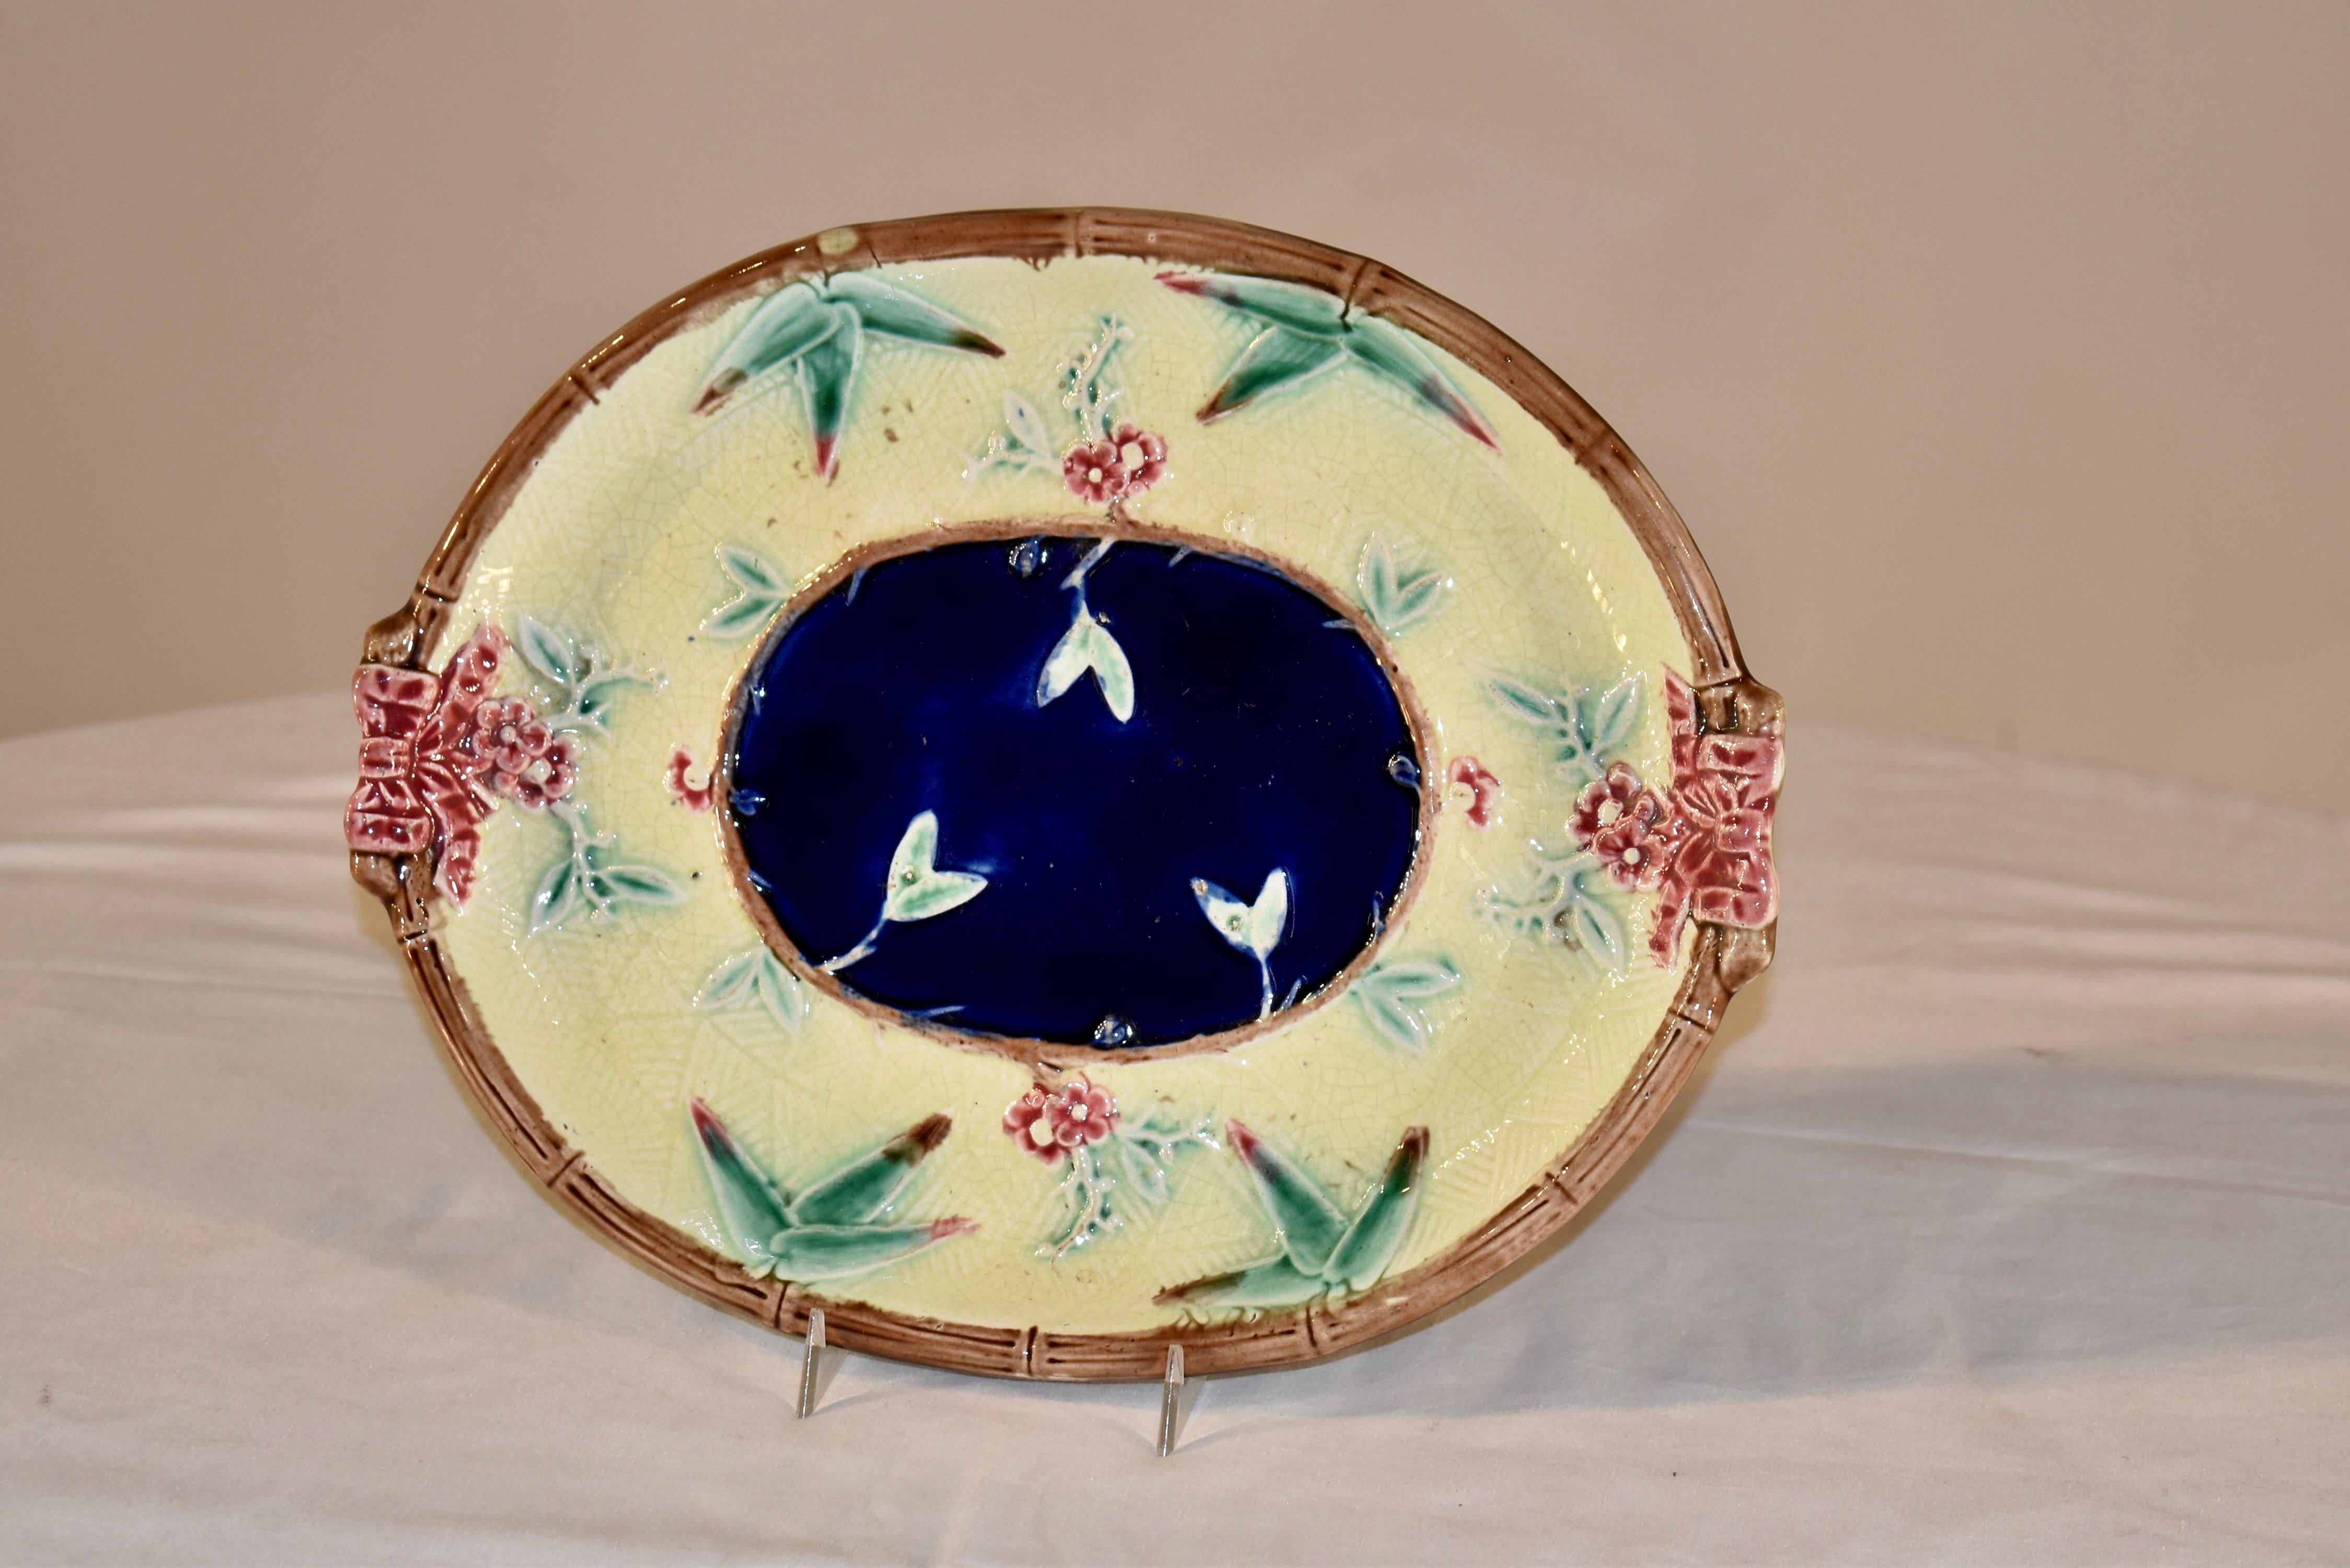 19th century majolica bread tray from England in a lovely color palette. The central medallion is cobalt blue, surrounded by a molded vine and leaf border, surrounded by a gorgeous pale yellow band, also surrounded by a molded bamboo designed edge,